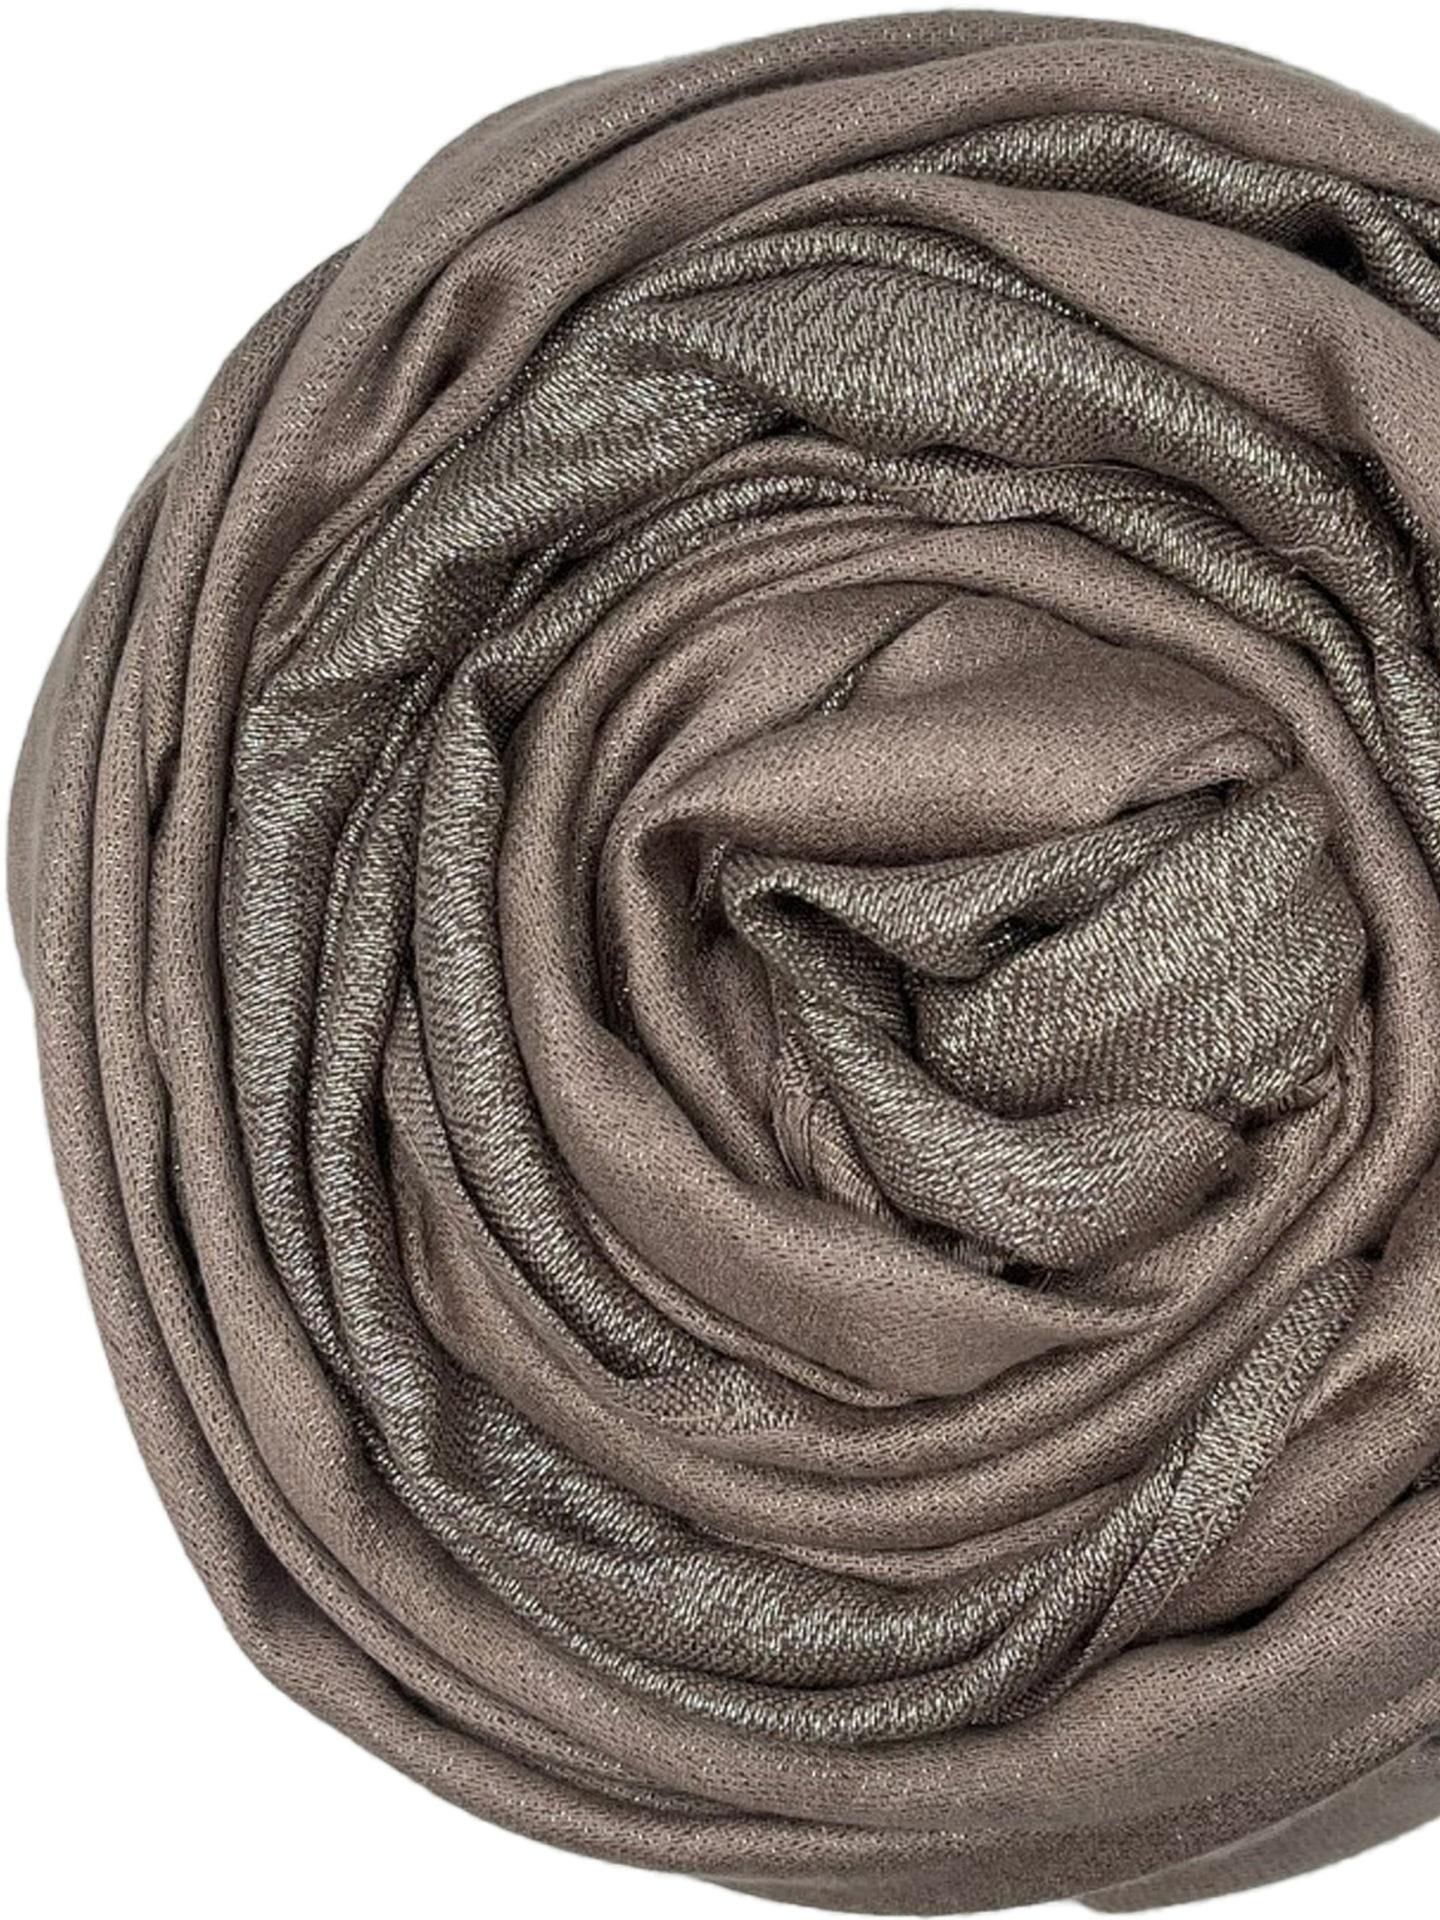 Glamour Scarf - Taupe